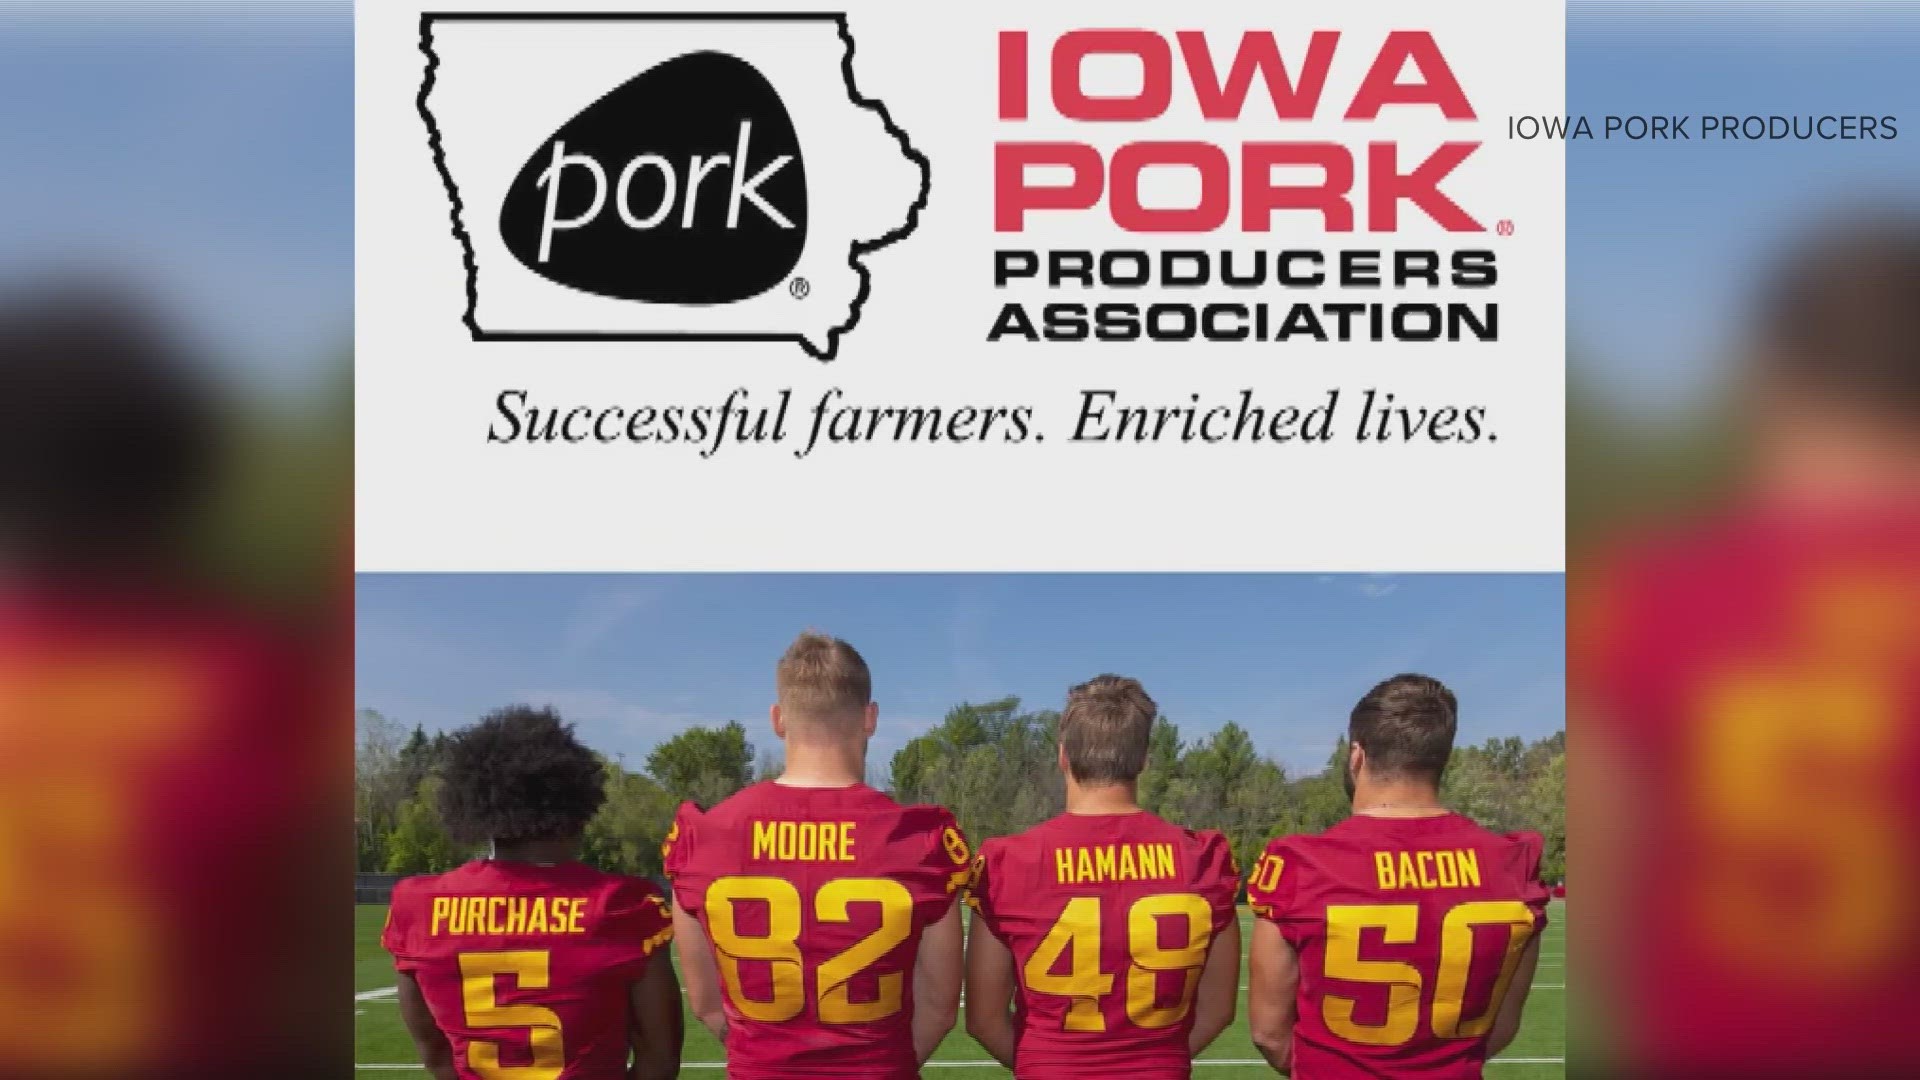 Iowa Pork Producers Sign Nil Deal With Isu Players Purchase Moore Hamann And Bacon 8579